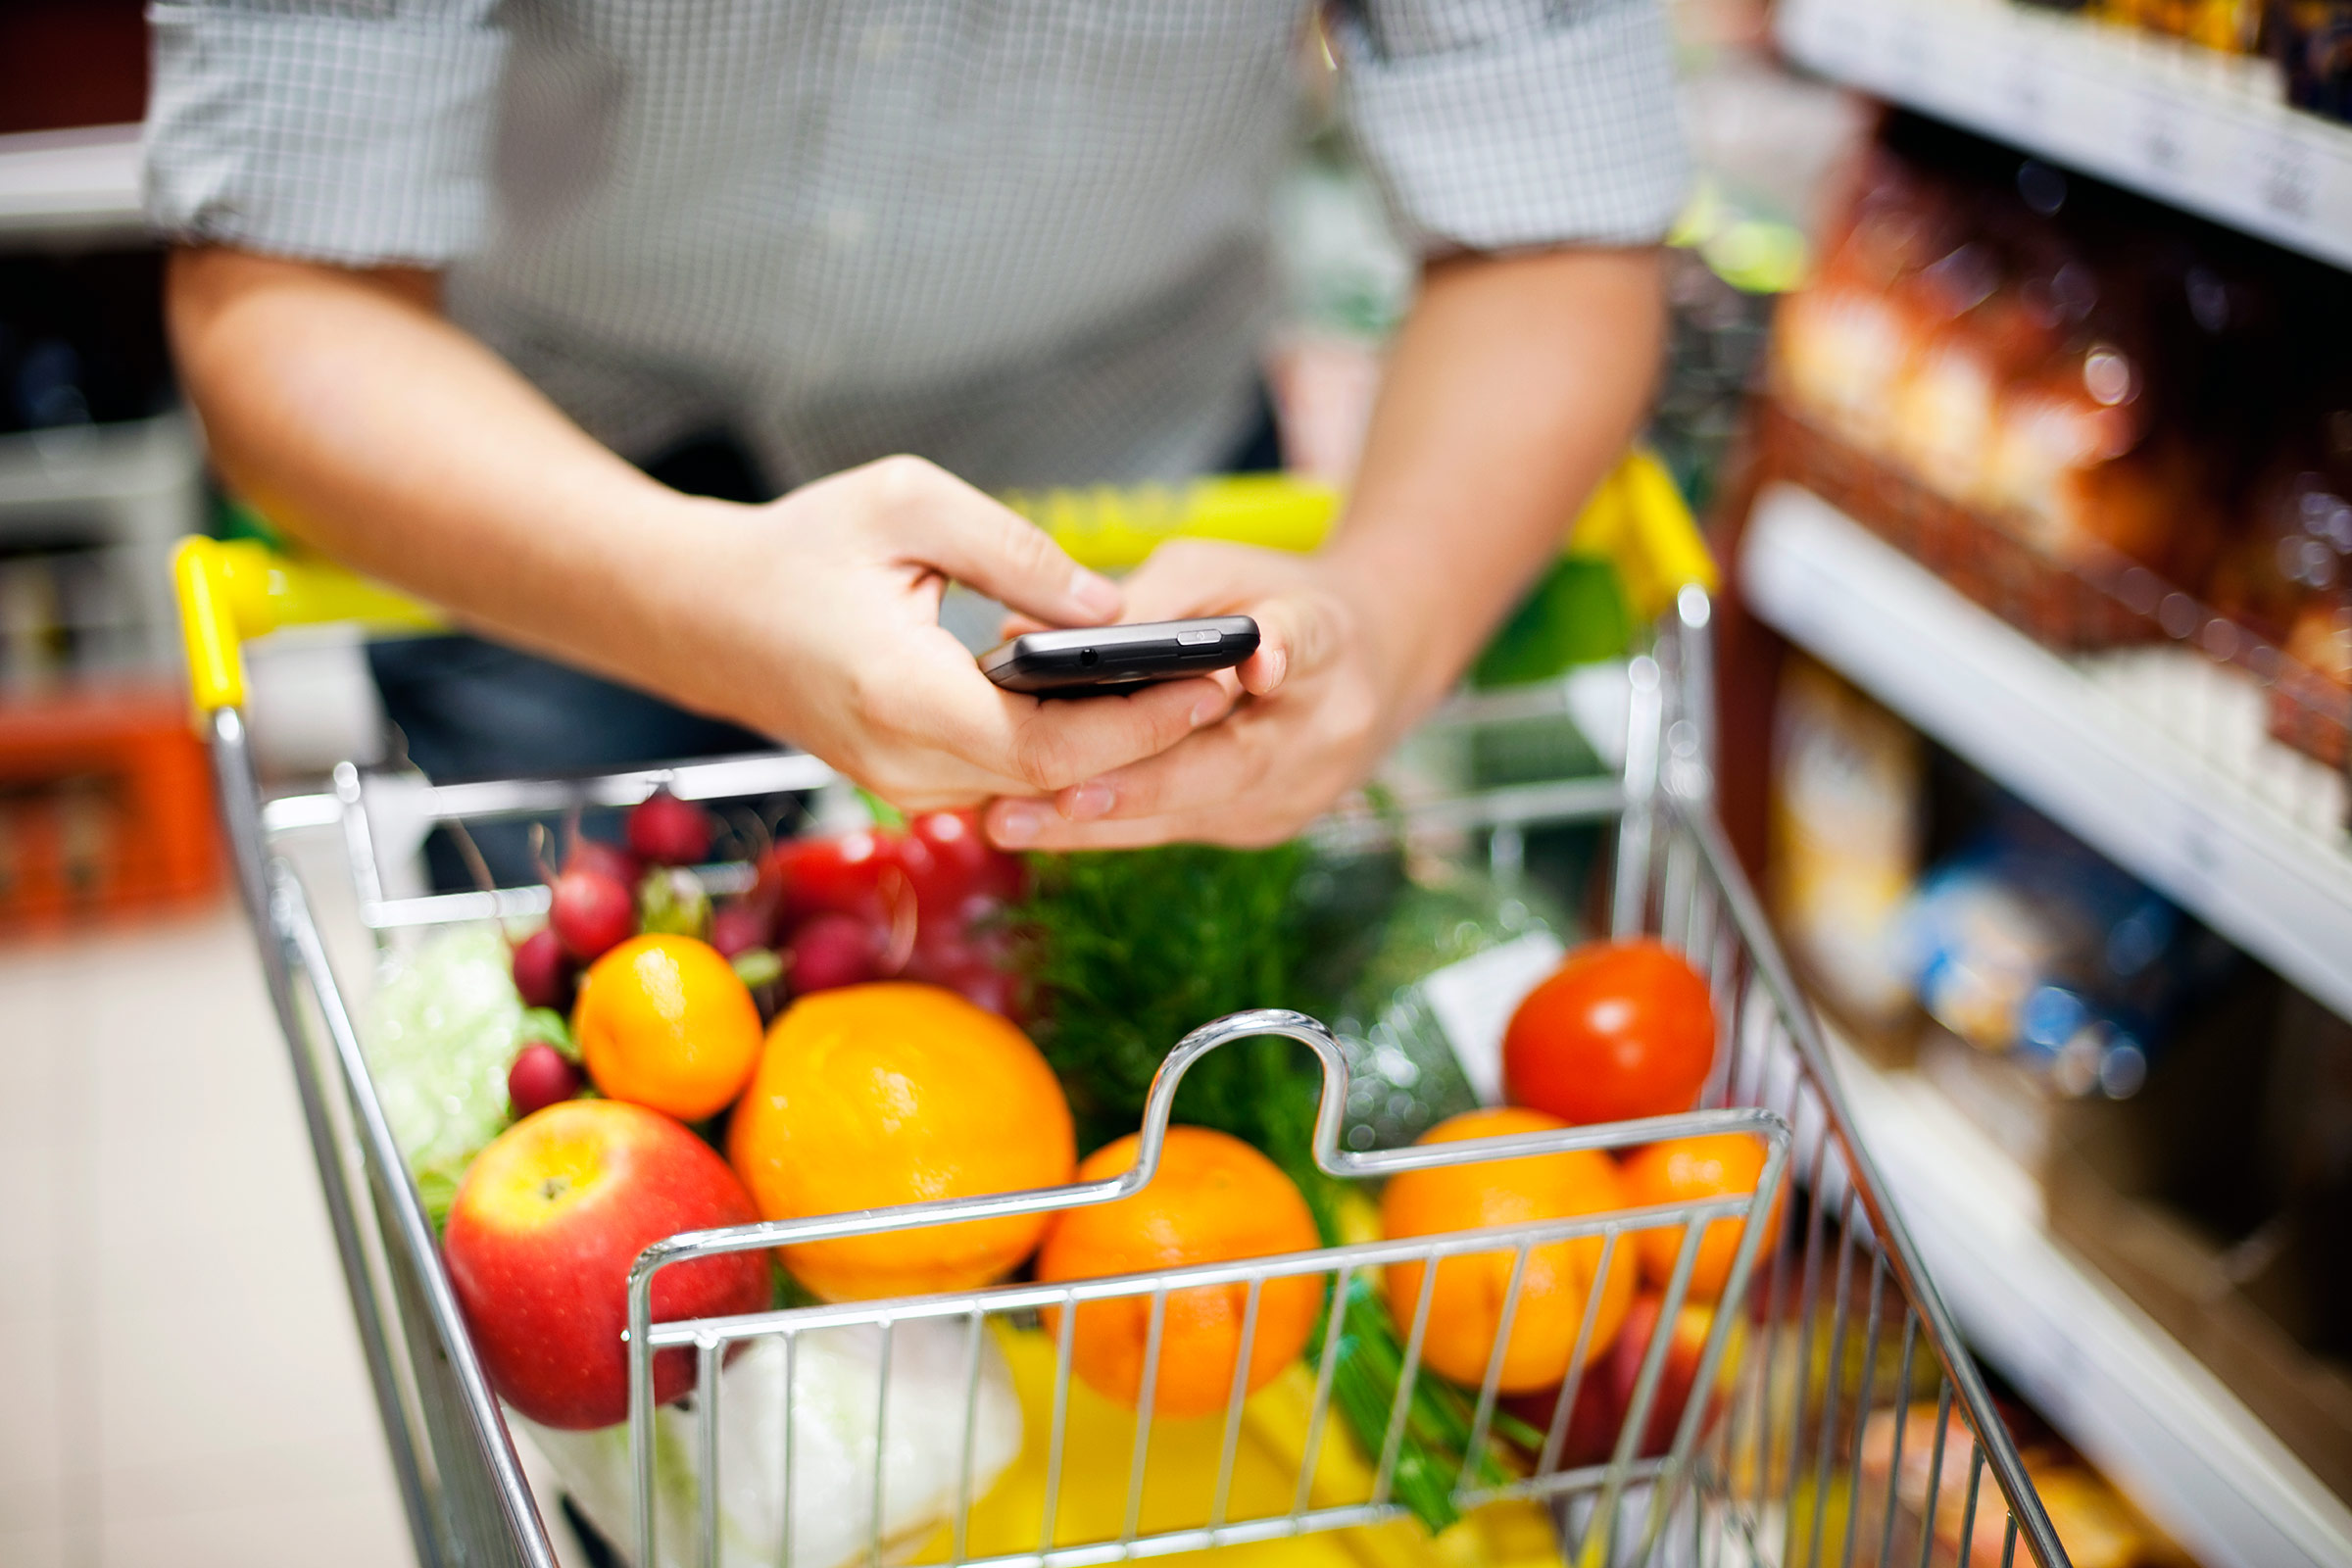 Its Time for Healthy Grocery Shopping - Women Fitness